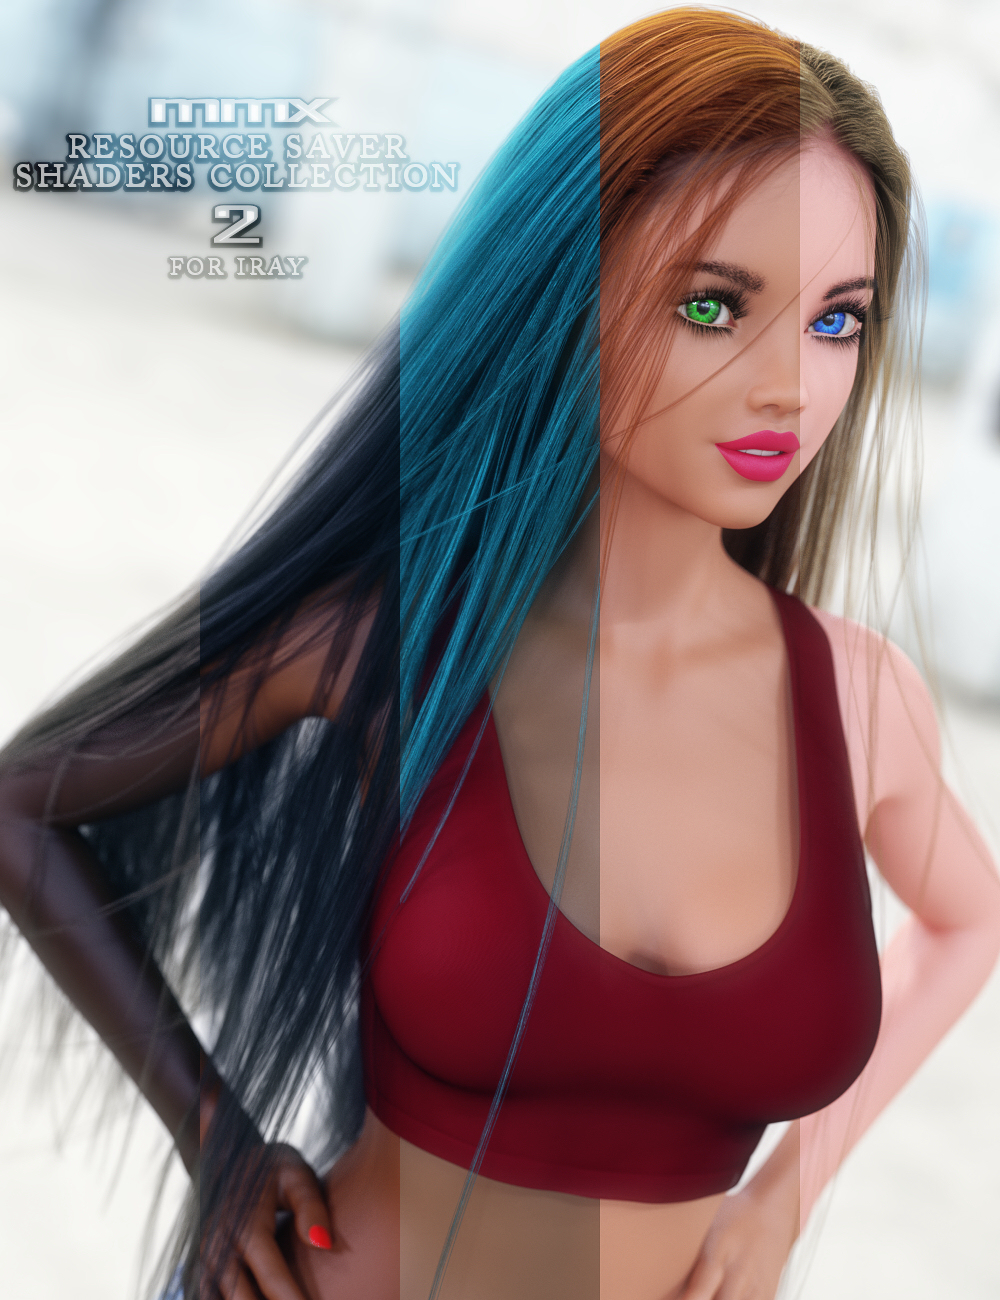 MMX Resource Saver Shaders Collection 2 for Iray by: Mattymanx, 3D Models by Daz 3D